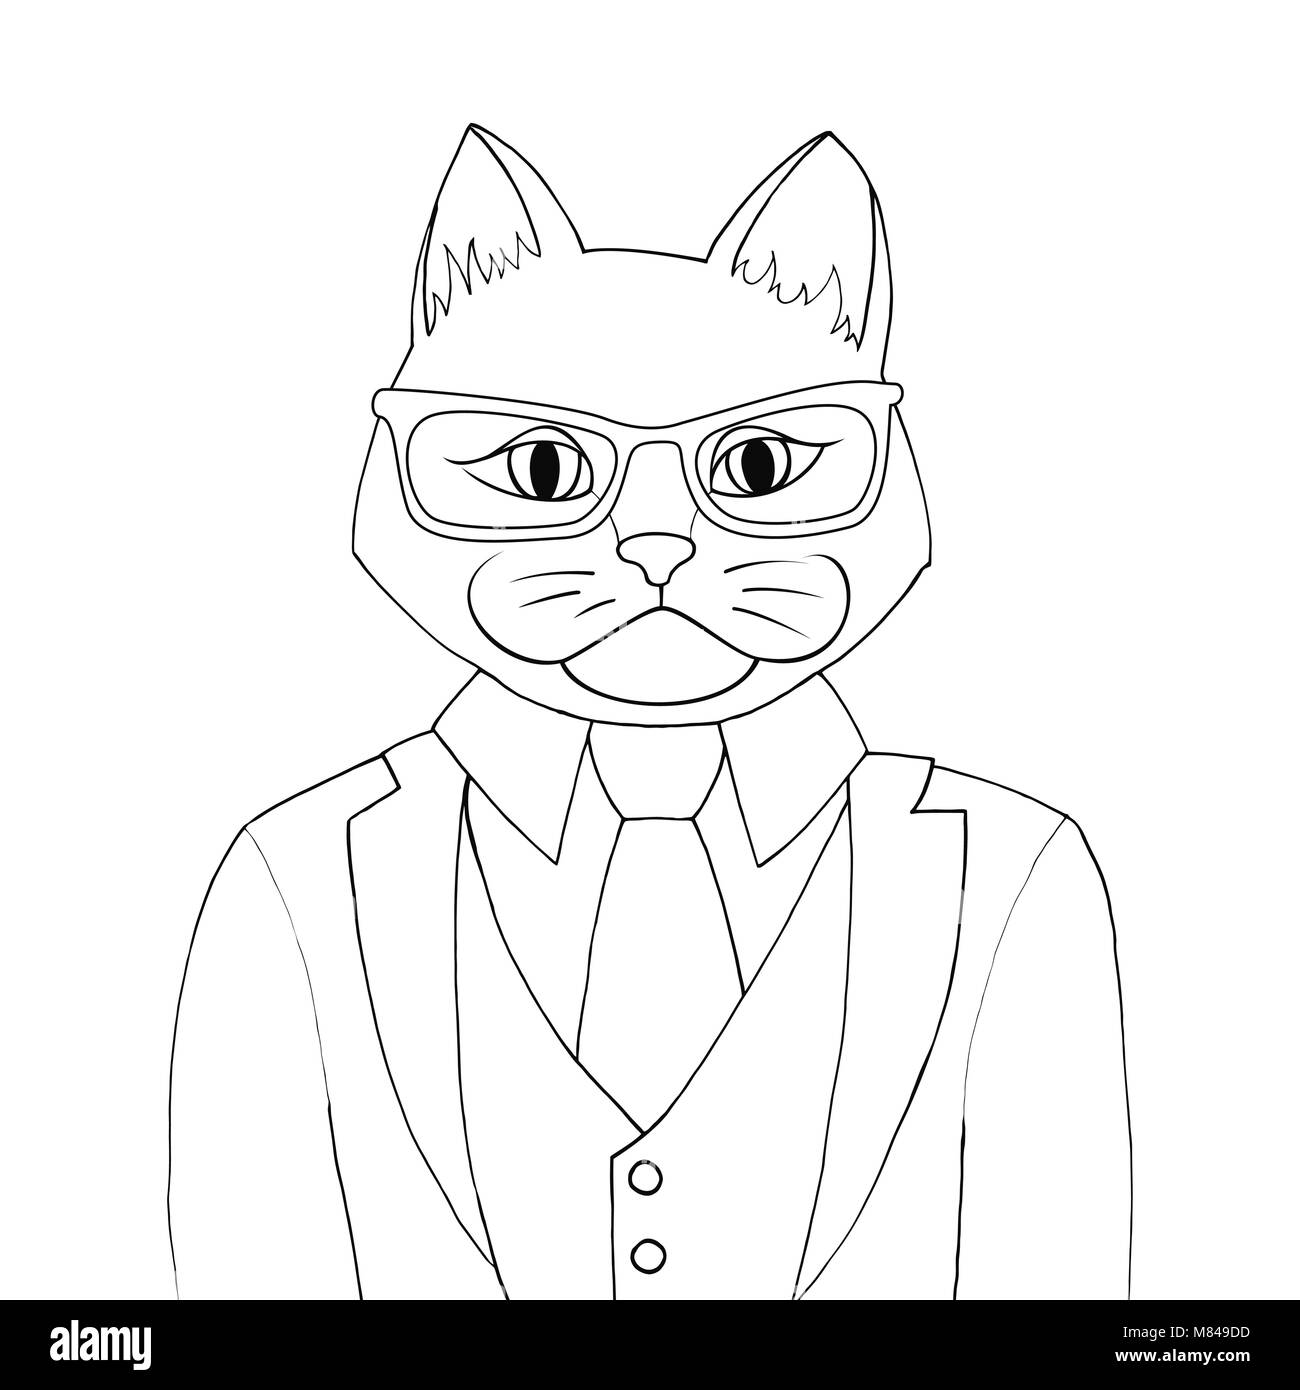 Man cat coloring book vector illustration. Catman dressed in a suit and tie  Stock Vector Image & Art - Alamy